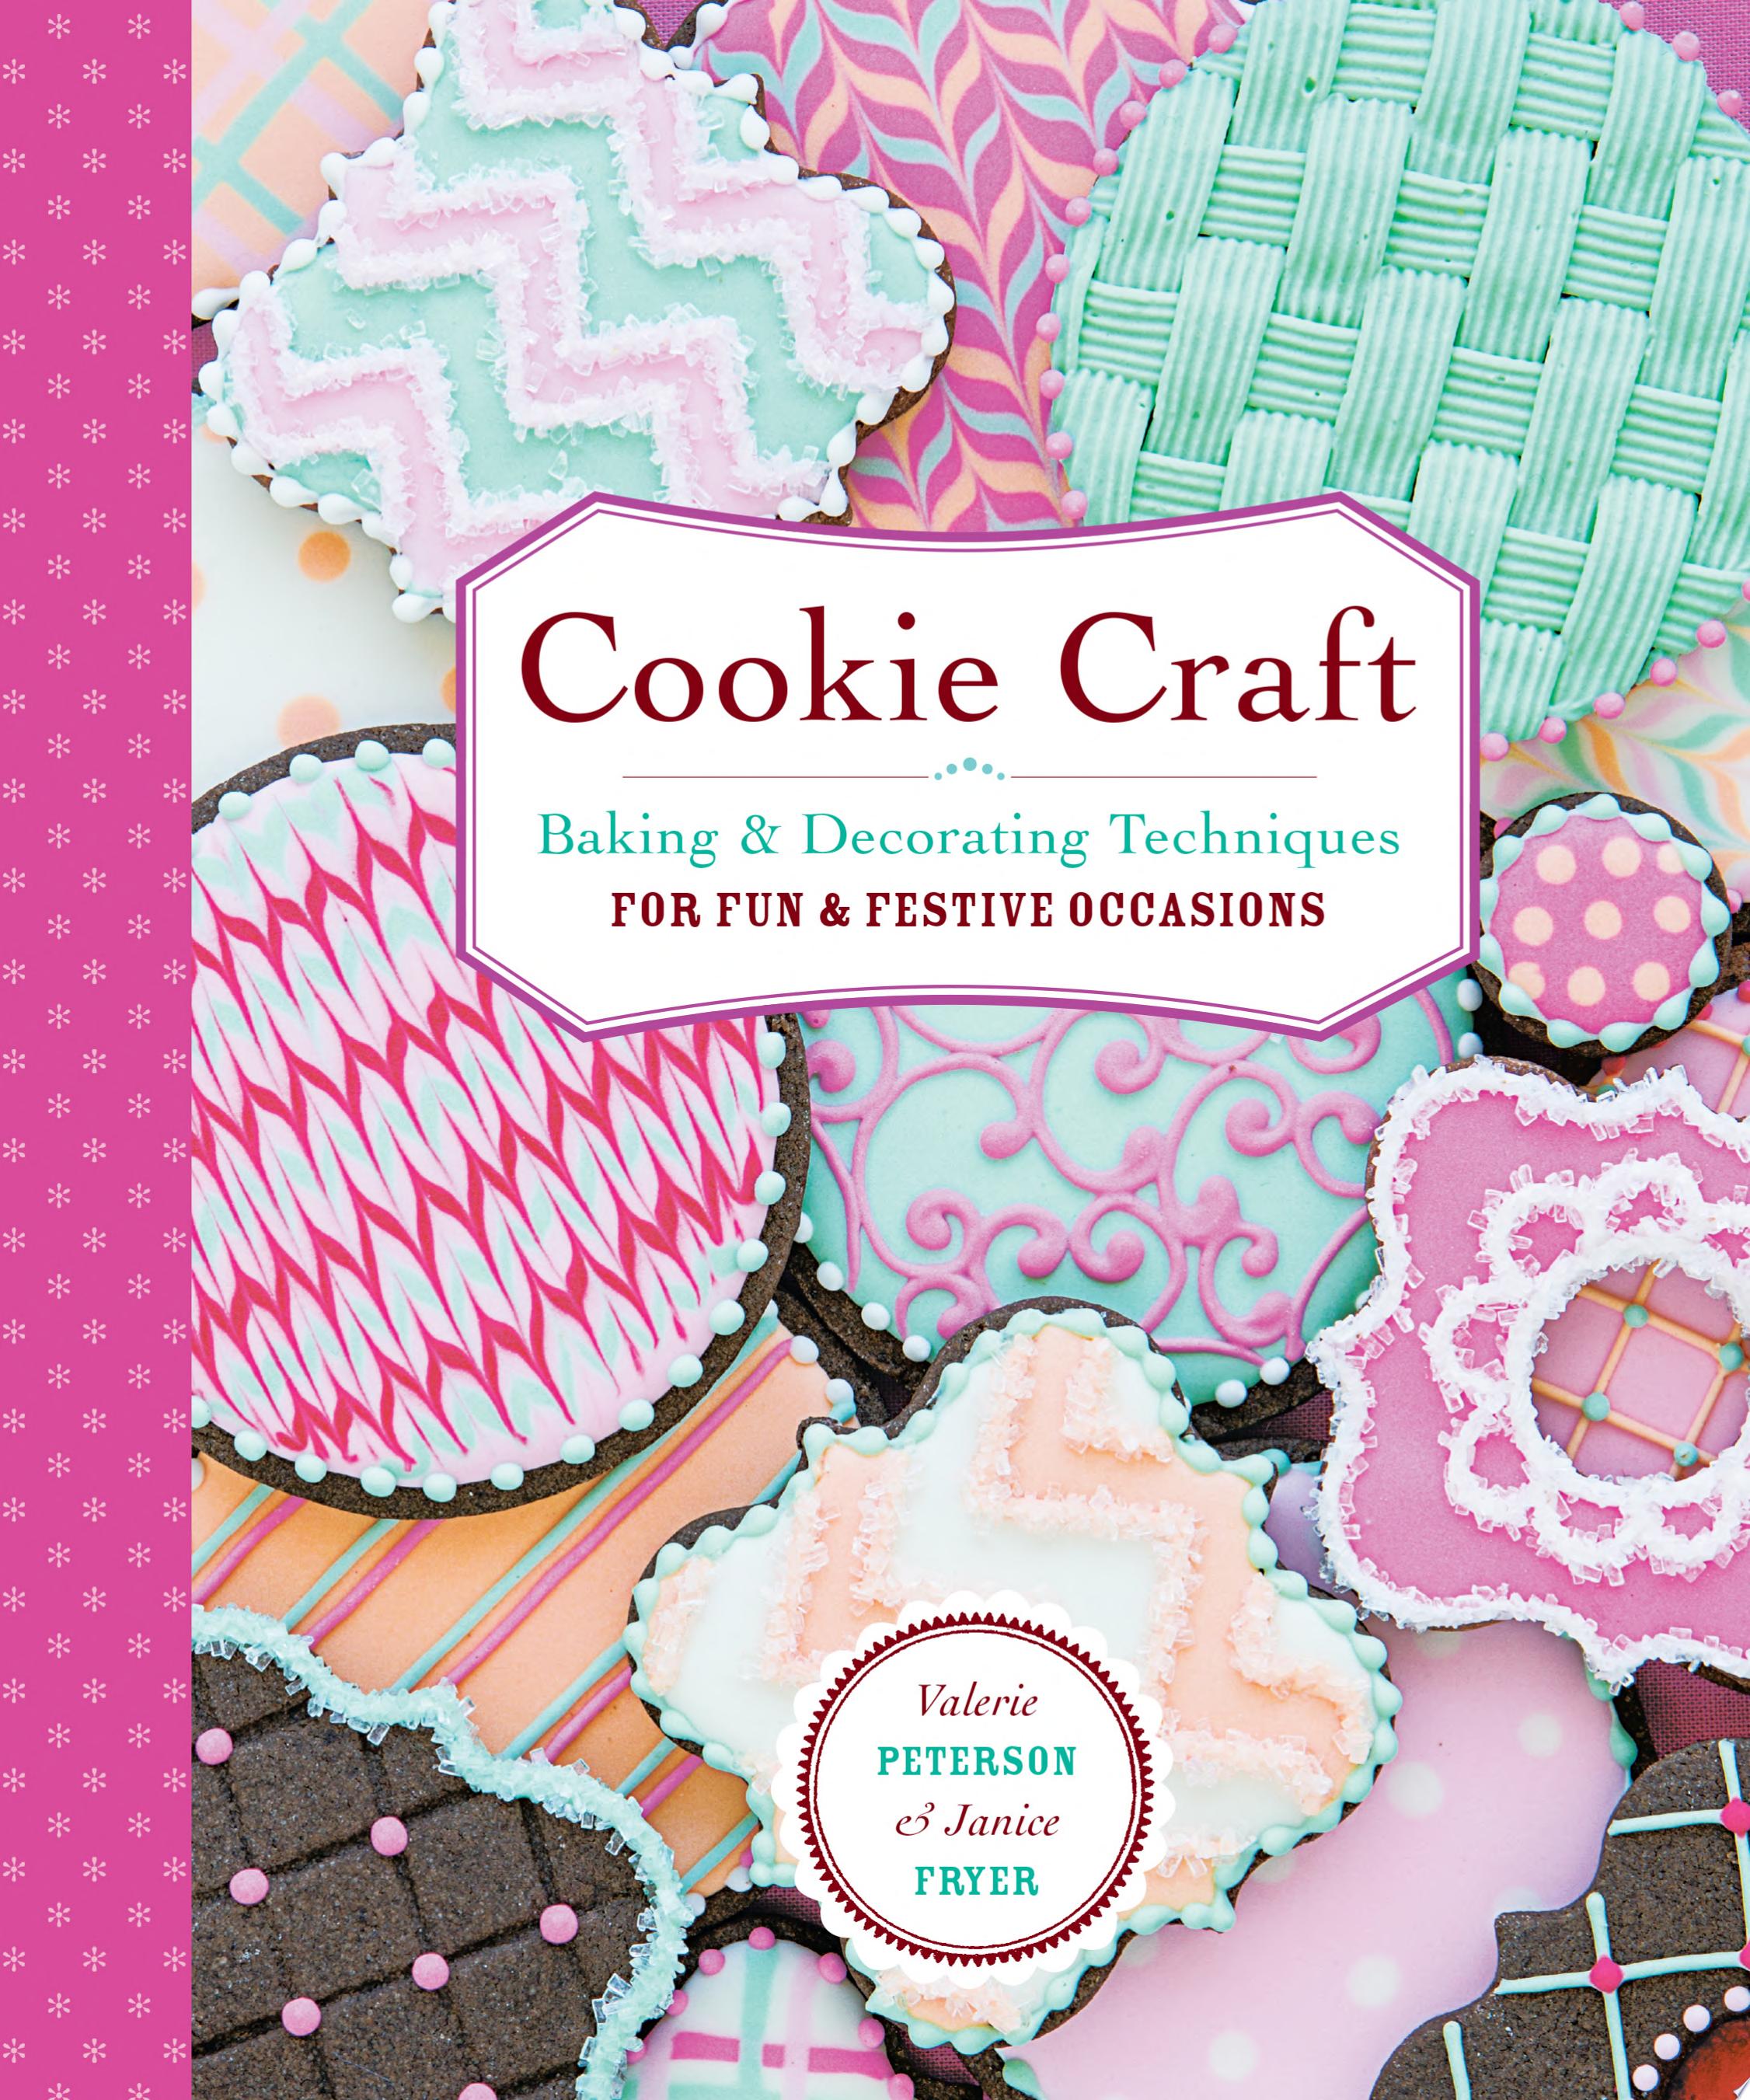 Image for "Cookie Craft"